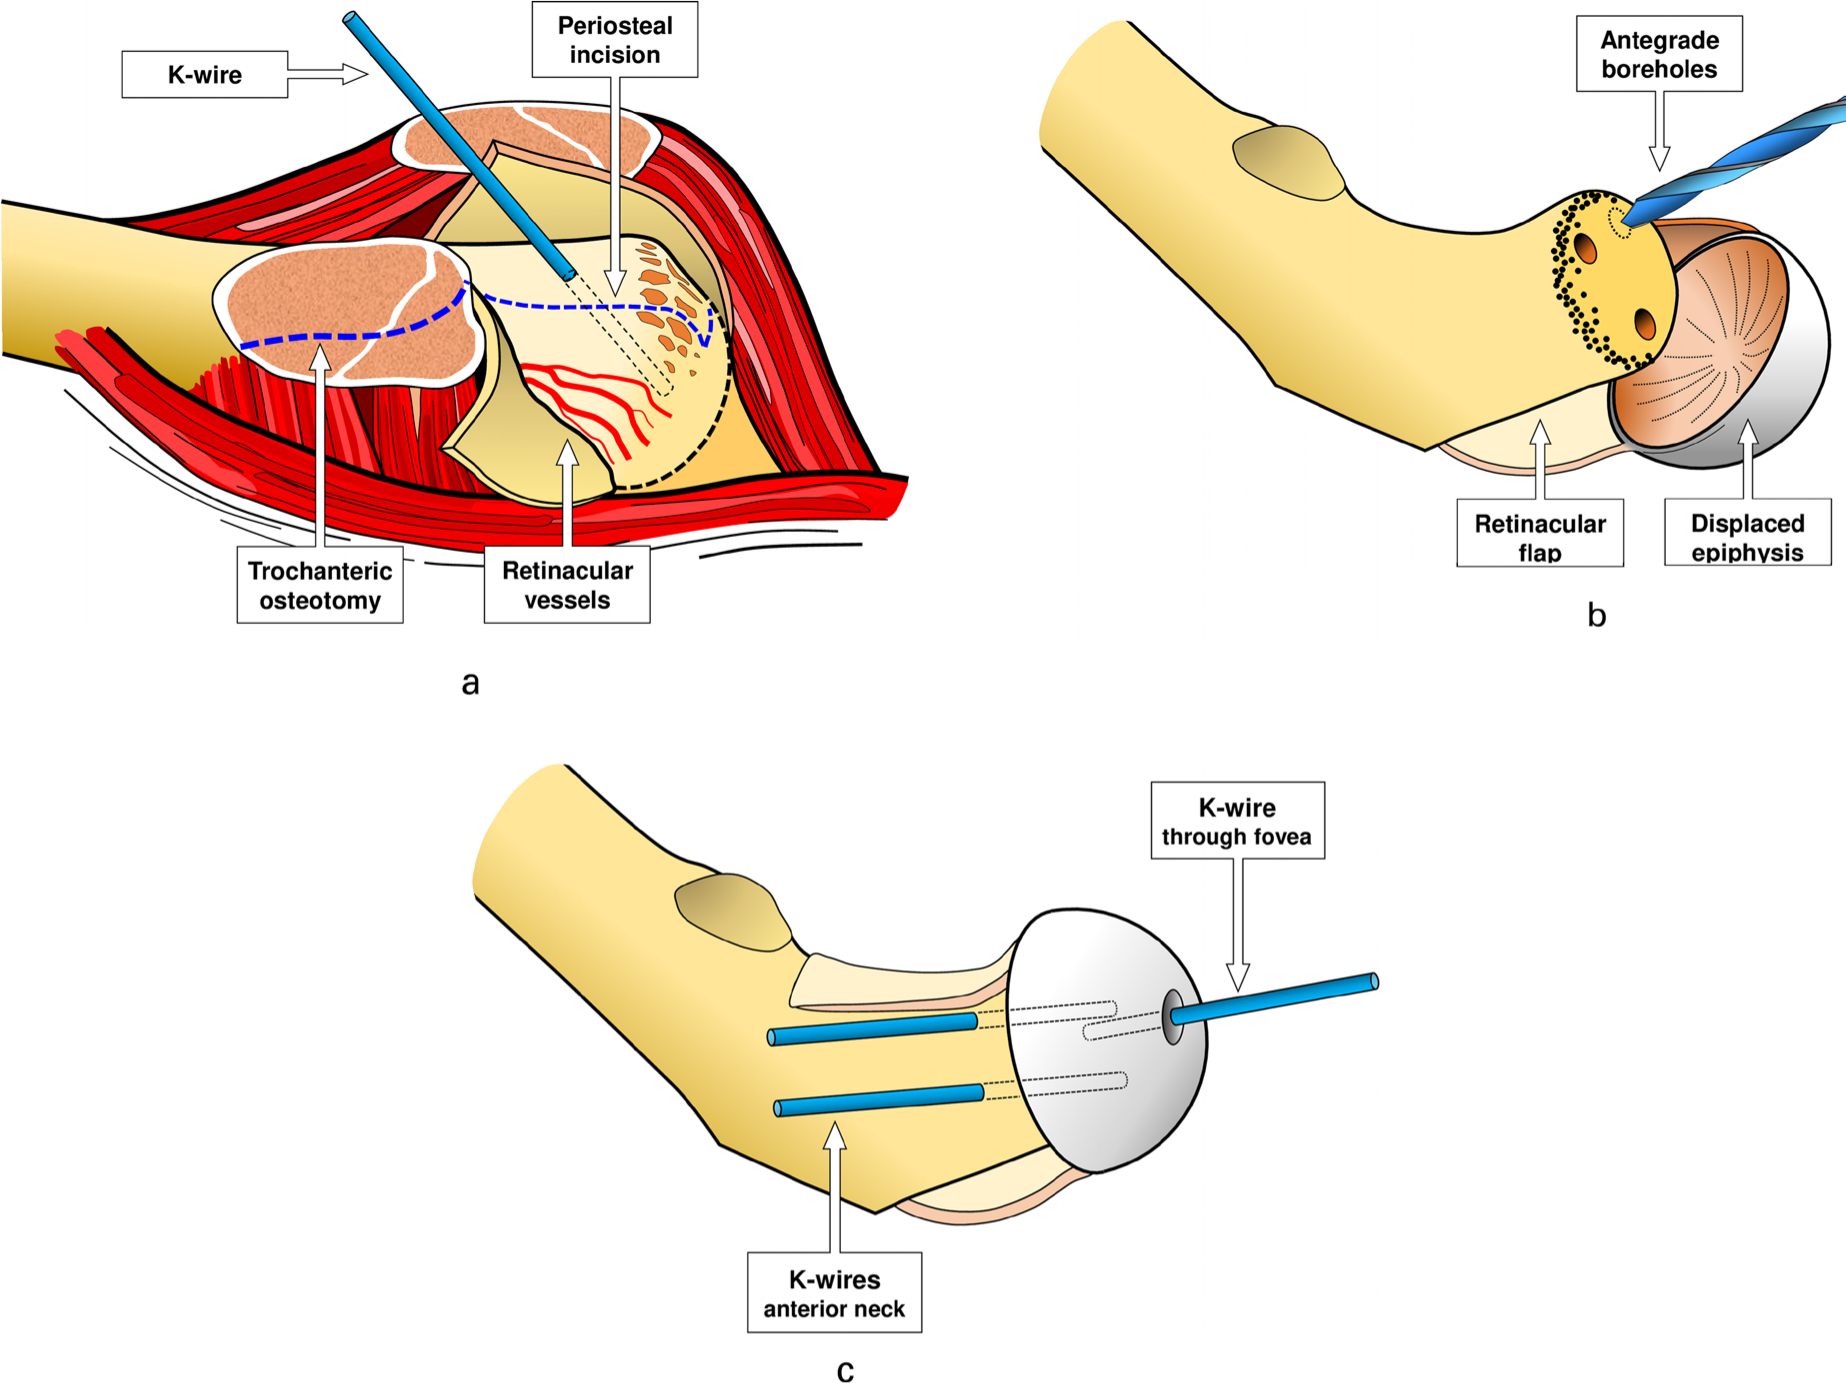 Fig. 1 
            a) Shows the surgical site after Z-shaped capsulotomy and trochanteric slide osteotomy of a left hip. The obliquely running apophyseal growth plate of the greater trochanter is visible. The slip zone with partially torn periosteal sheet at the head-neck junction and the femoral head in its posterior slip position are drawn. The blue dotted lines indicate the reduction osteotomy of the posterior and superior aspects of the neck and the L-shaped (superior towards anterior) incision of the periosteum for safe development of the extended periosteal flap leaving intact the terminal subsynovial branches of the deep branch of the medial femoral circumflex artery. The head is securely fixed with a K-wire. b) After removal of all the cartilage of the growth plate two distal and one proximal antegrade boreholes for later definitive stabilization of the epiphysis are made. This technical modification allows optimal positioning of the definitive implants at the level of head-neck junction. c) After manual reduction of the femoral head, a first provisional K-wire is introduced antegrade through the fovea of the head and the head offset is controlled visually and manually all around the neck. Then two retrograde K-wires are introduced from the anterior aspect of the neck, the first K-wire removed, the hip relocated and hip clearance checked. Correct bleeding out of a borehole of the head is assessed after reduction and provisional fixation.
          